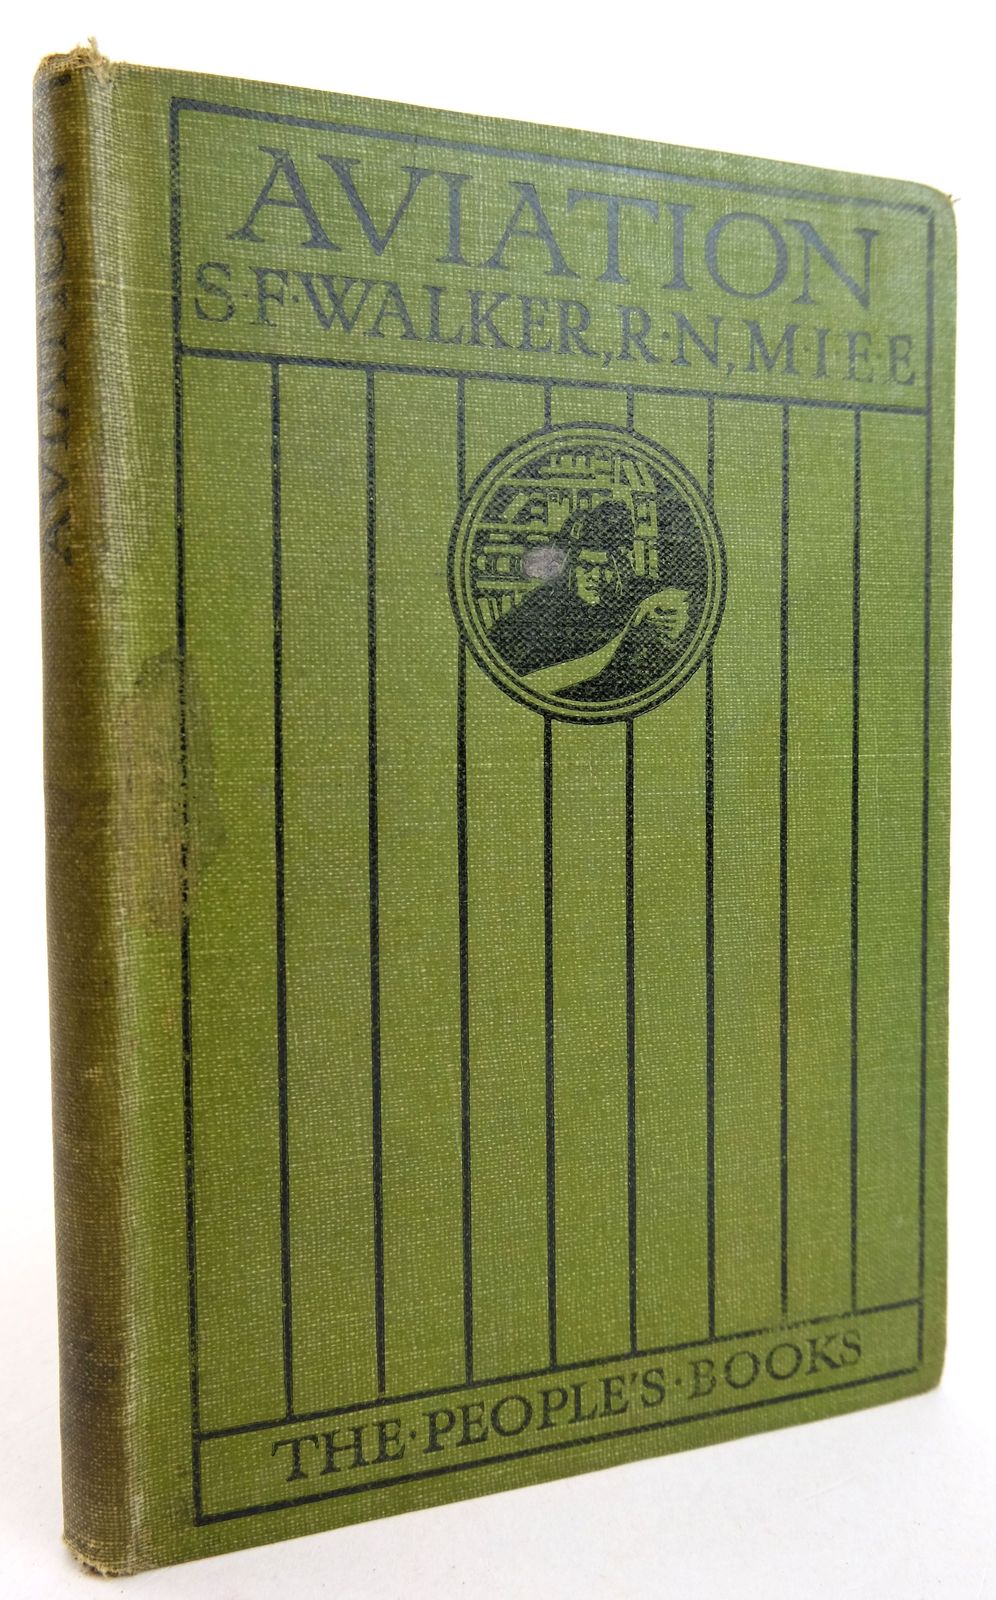 Photo of AVIATION: ITS PRINCIPLES ITS PRESENT AND FUTURE written by Walker, Sydney F. published by T.C. &amp; E.C. Jack (STOCK CODE: 1819529)  for sale by Stella & Rose's Books